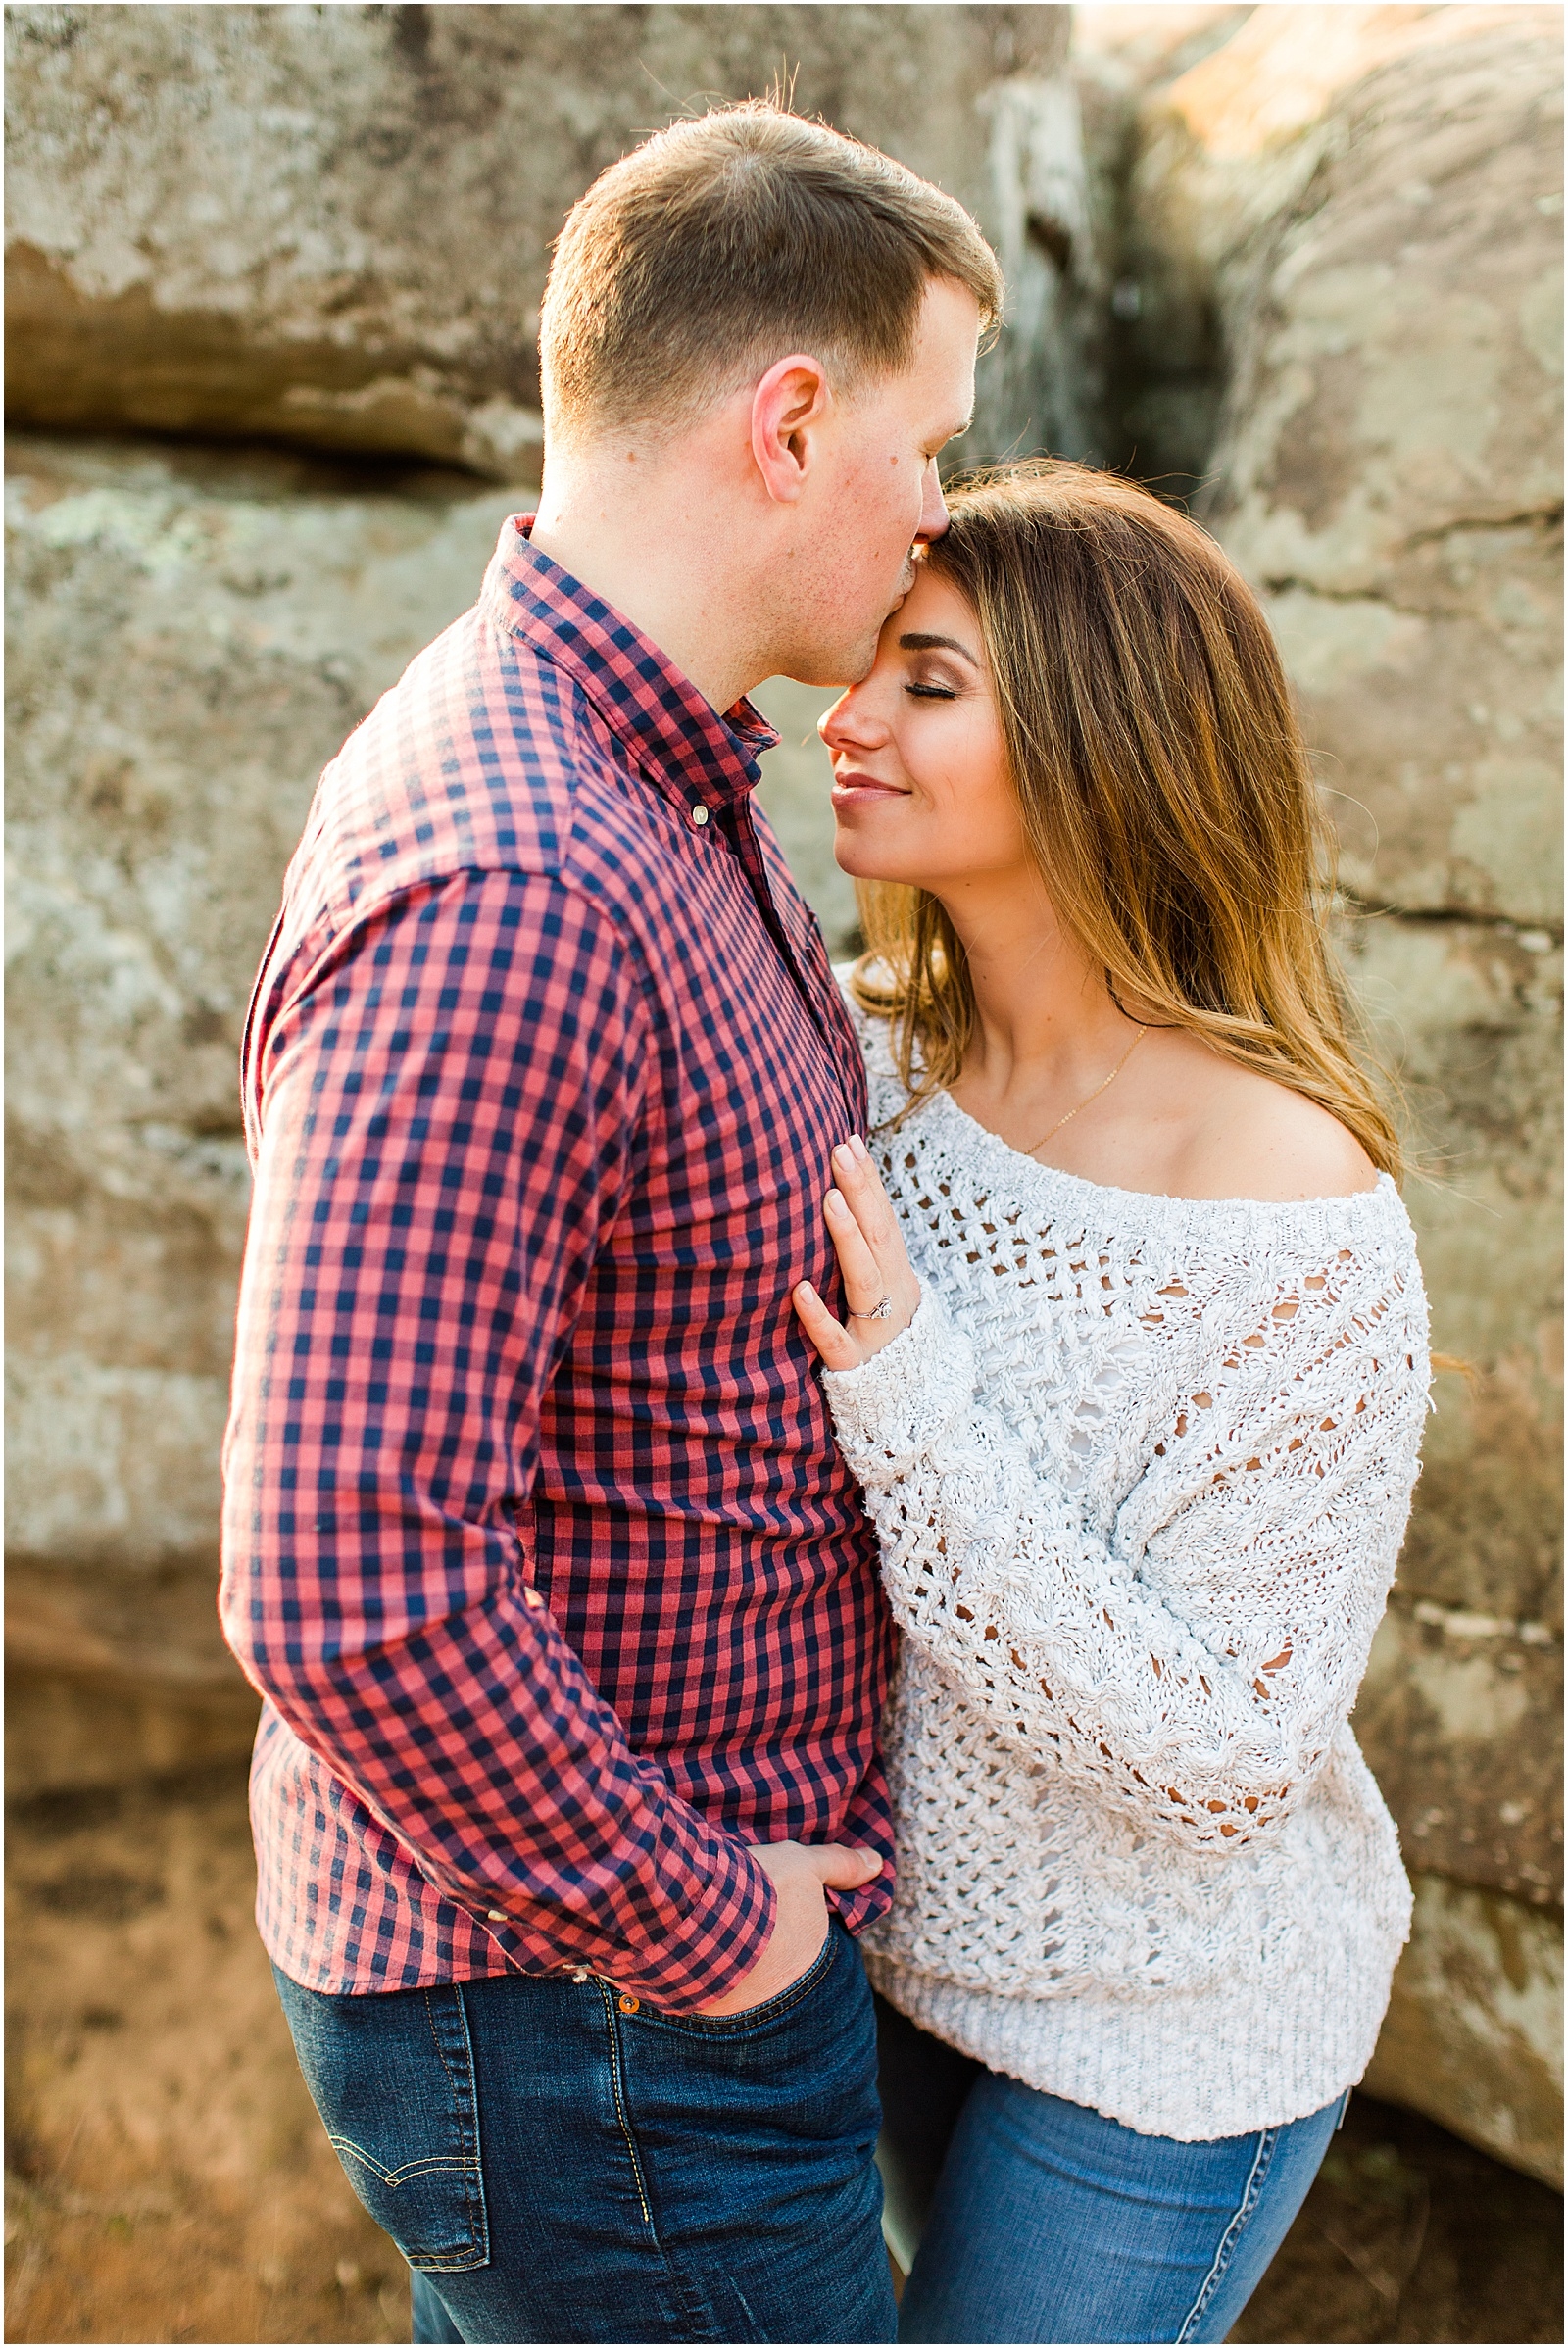 A Sunny Garden of the Gods Engagement Session | Shiloh and Lee | Bret and Brandie Photography052.jpg